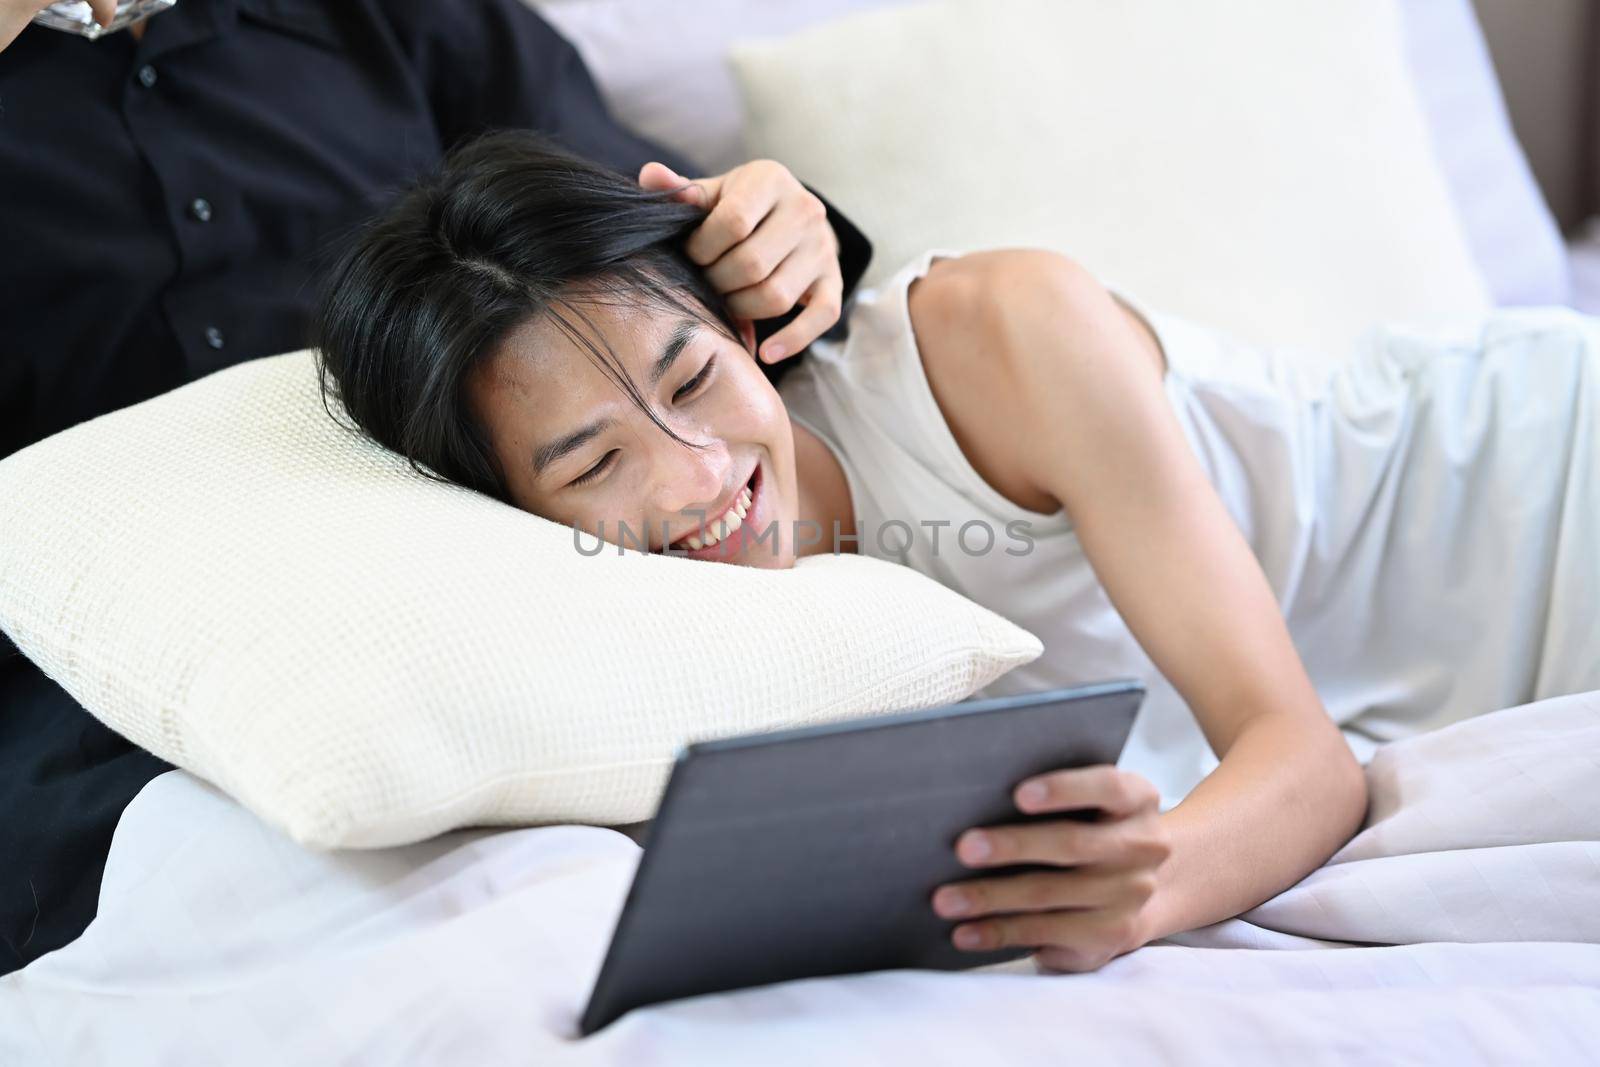 Happy homosexual couple using digital tablet on bed while spending leisure time together. LGBT, pride, relationships and equality concept.